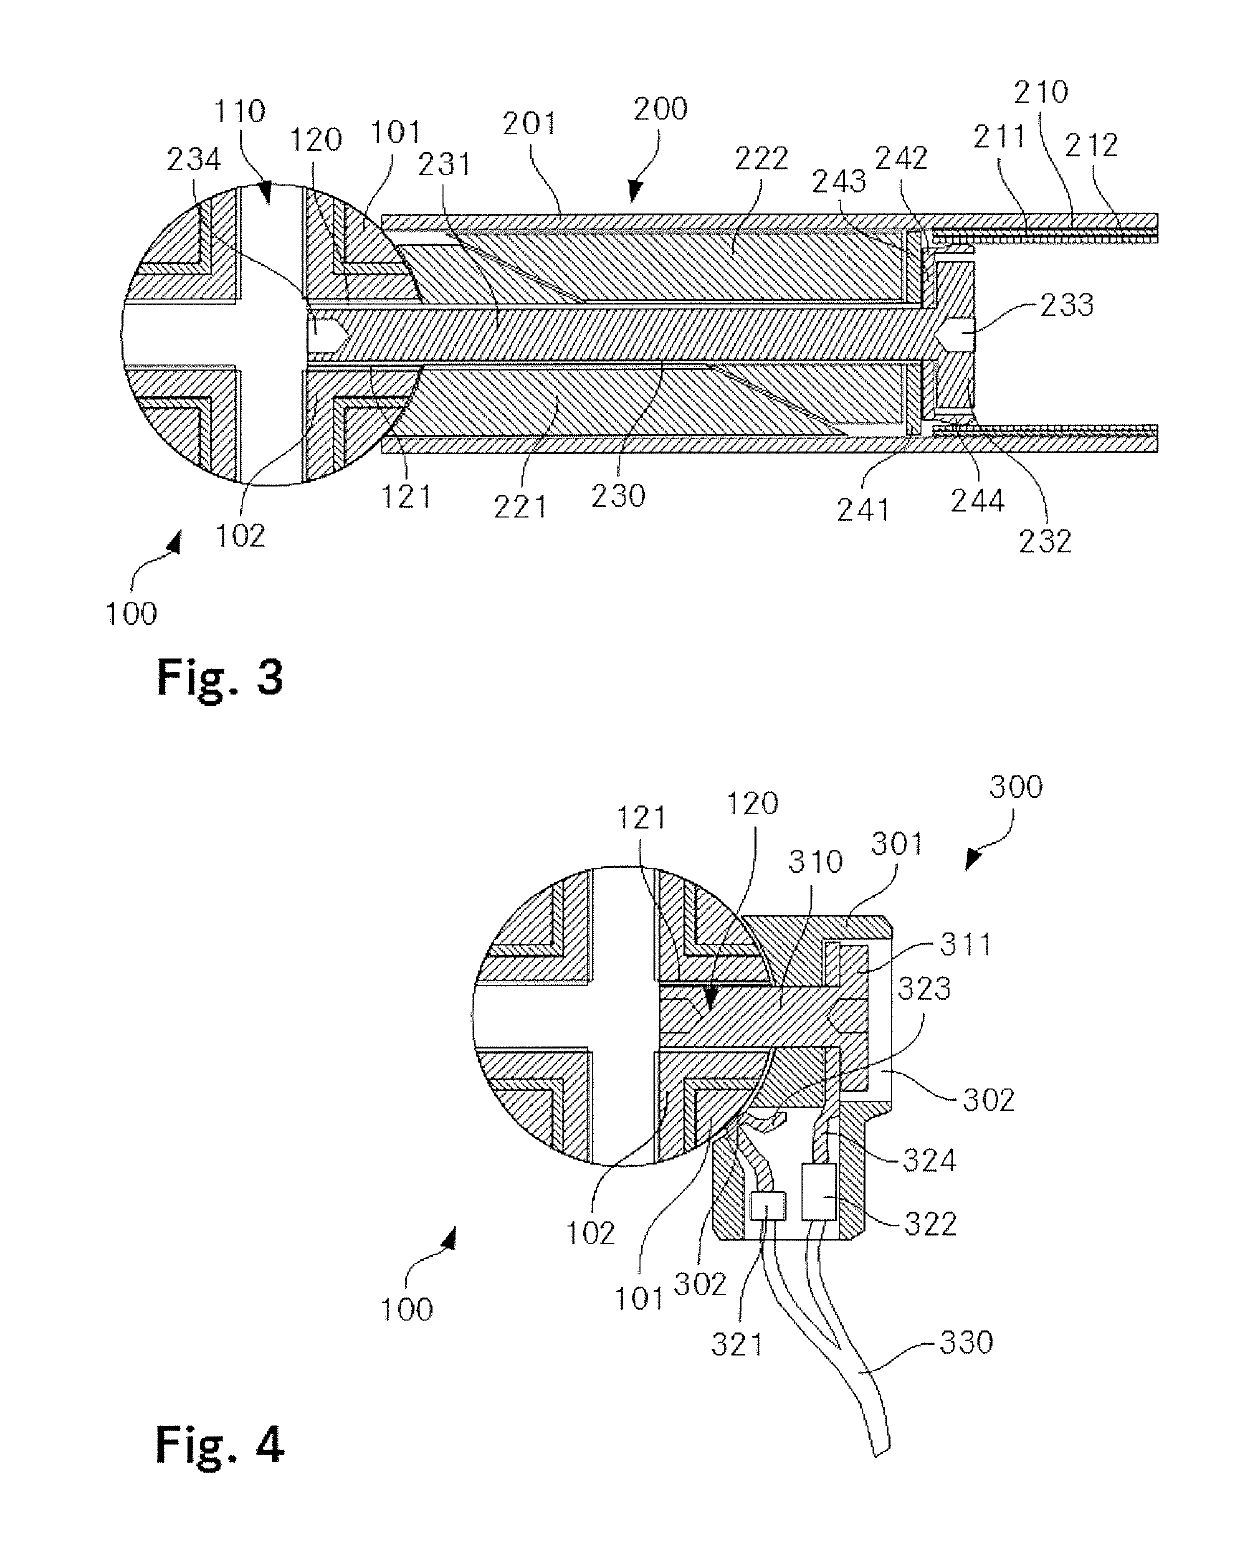 Node element for a furniture system having a three-dimensional load-bearing tube structure